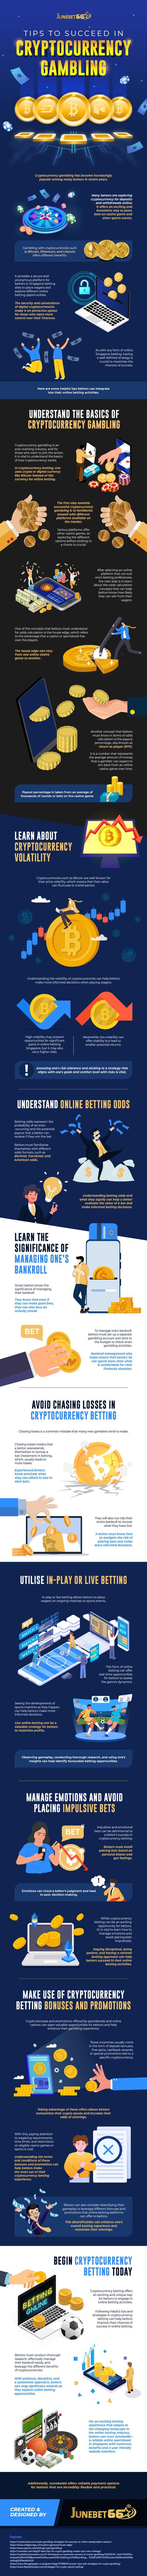 Tips-to-Succeed-in-Cryptocurrency-Gambling-Infographic-Image-0